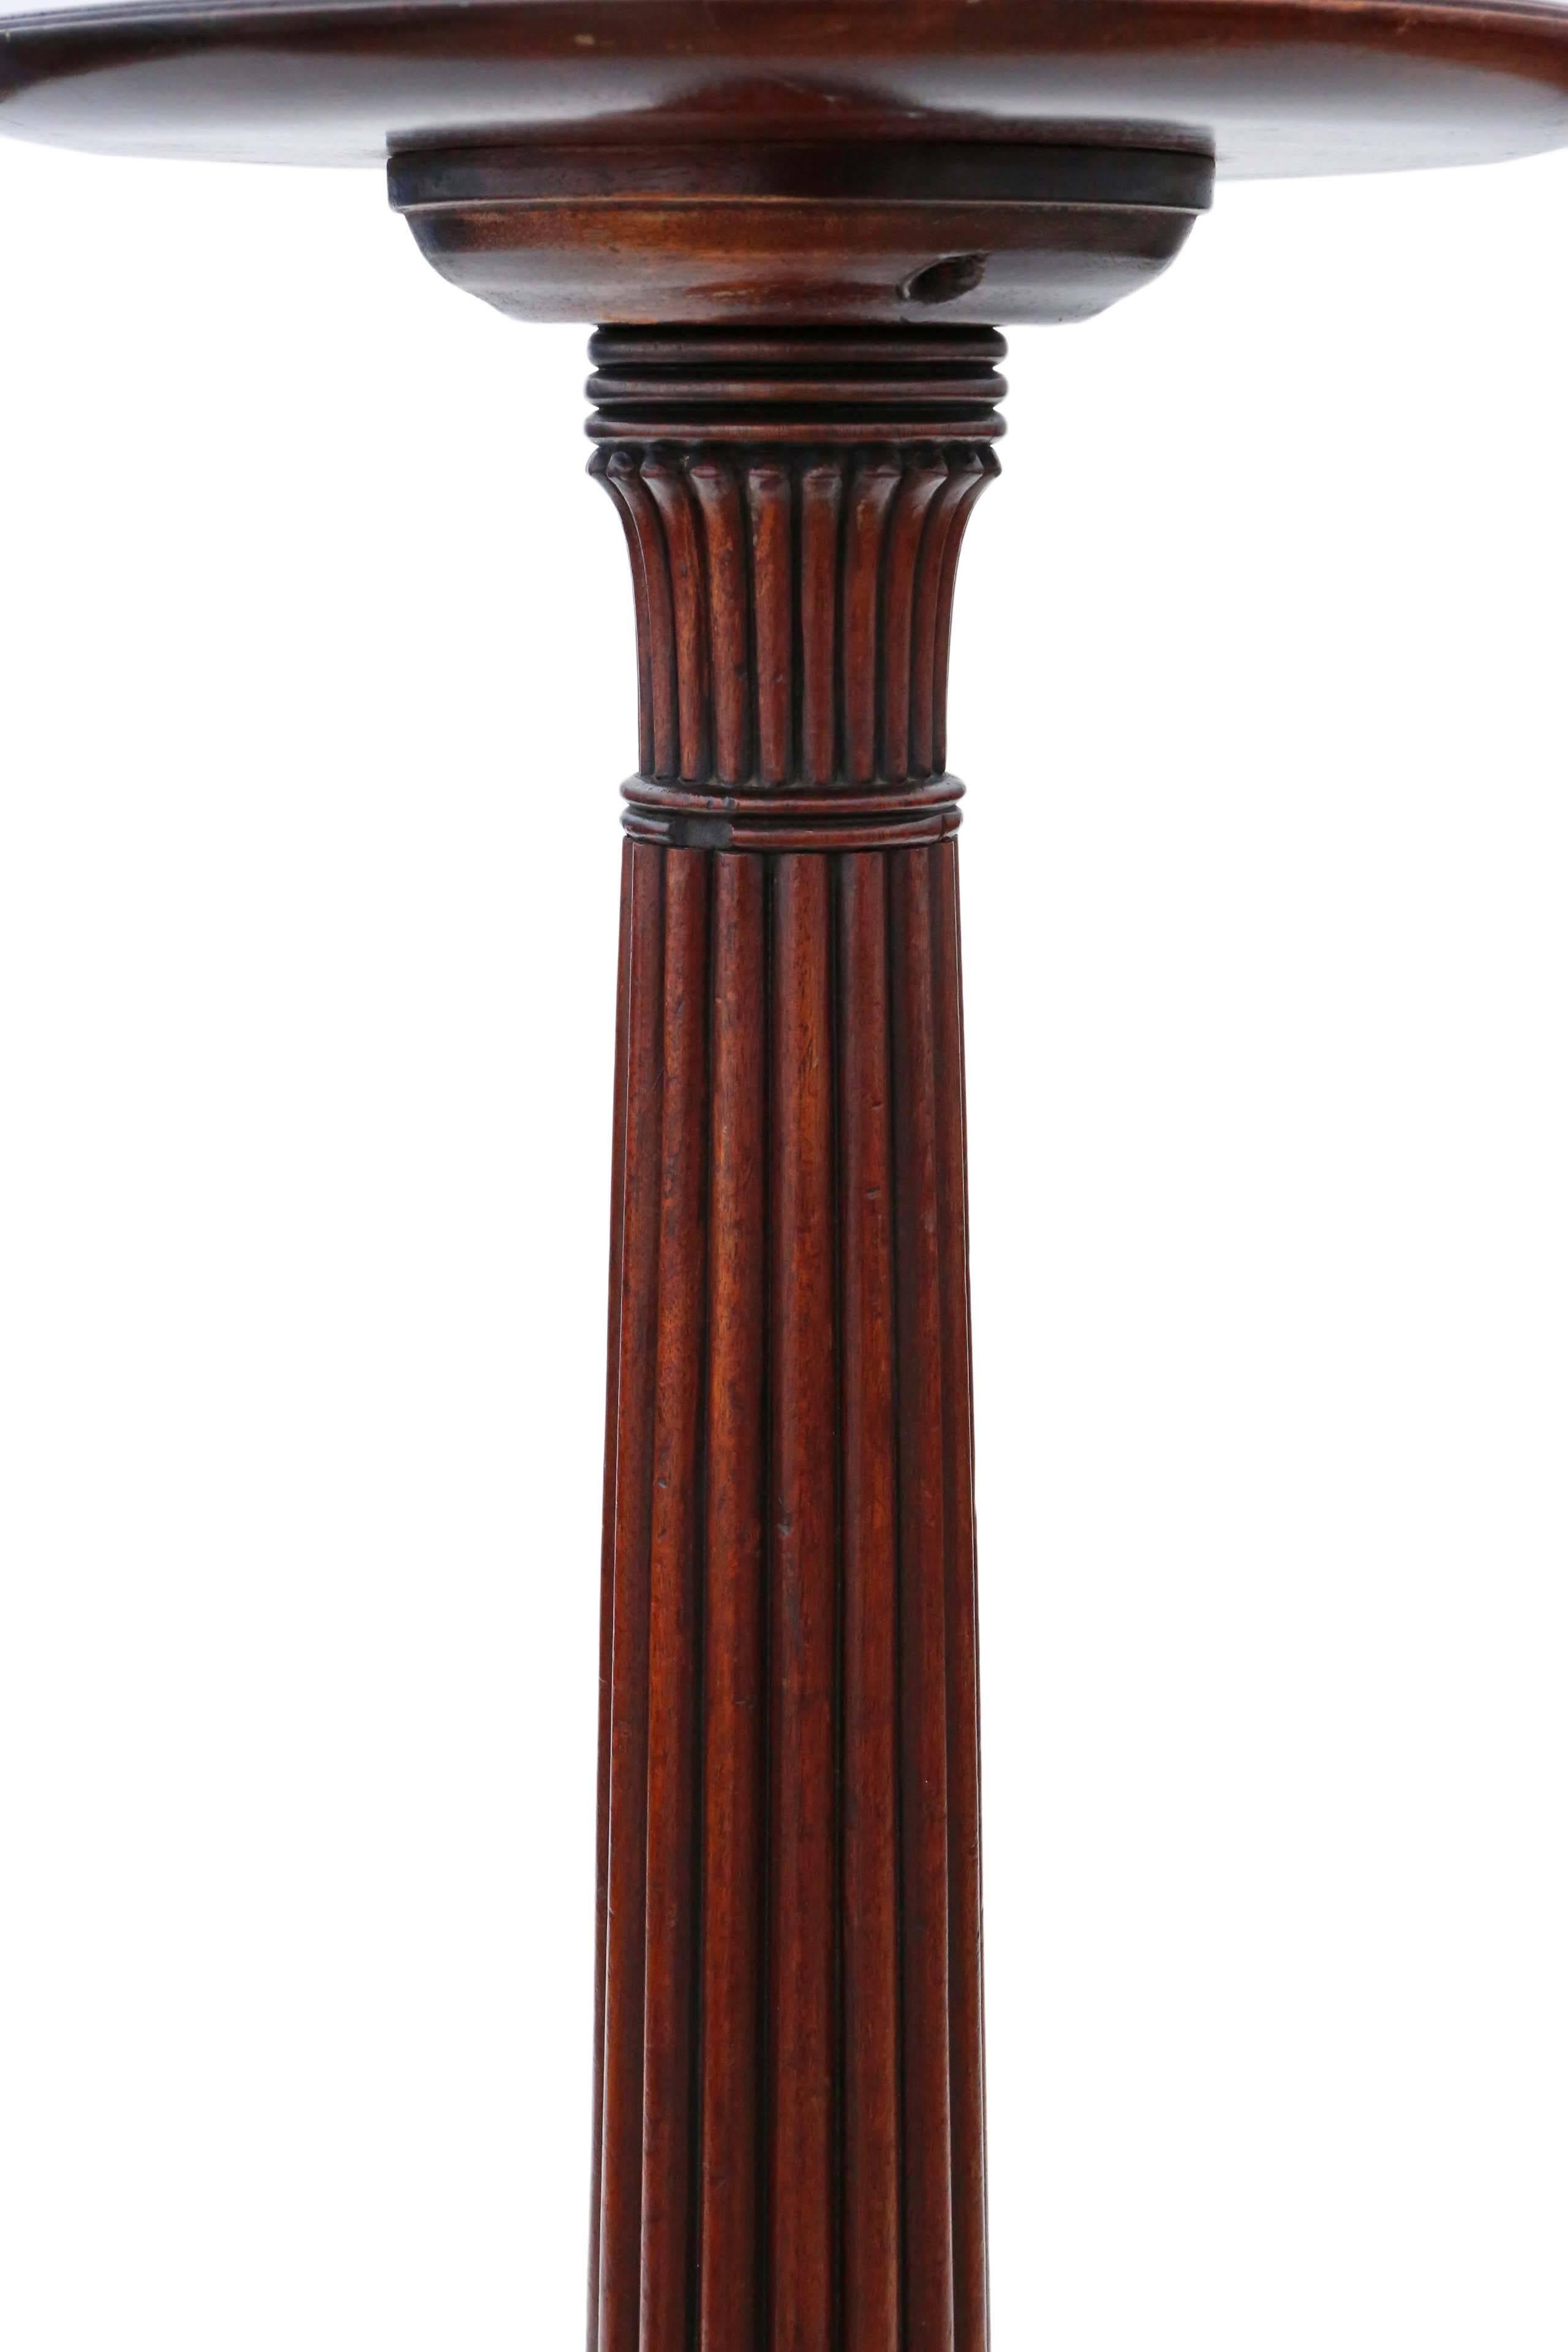 Antique Quality 19th Century Mahogany Torchiere Pedestal Plant Stand In Good Condition For Sale In Wisbech, Walton Wisbech